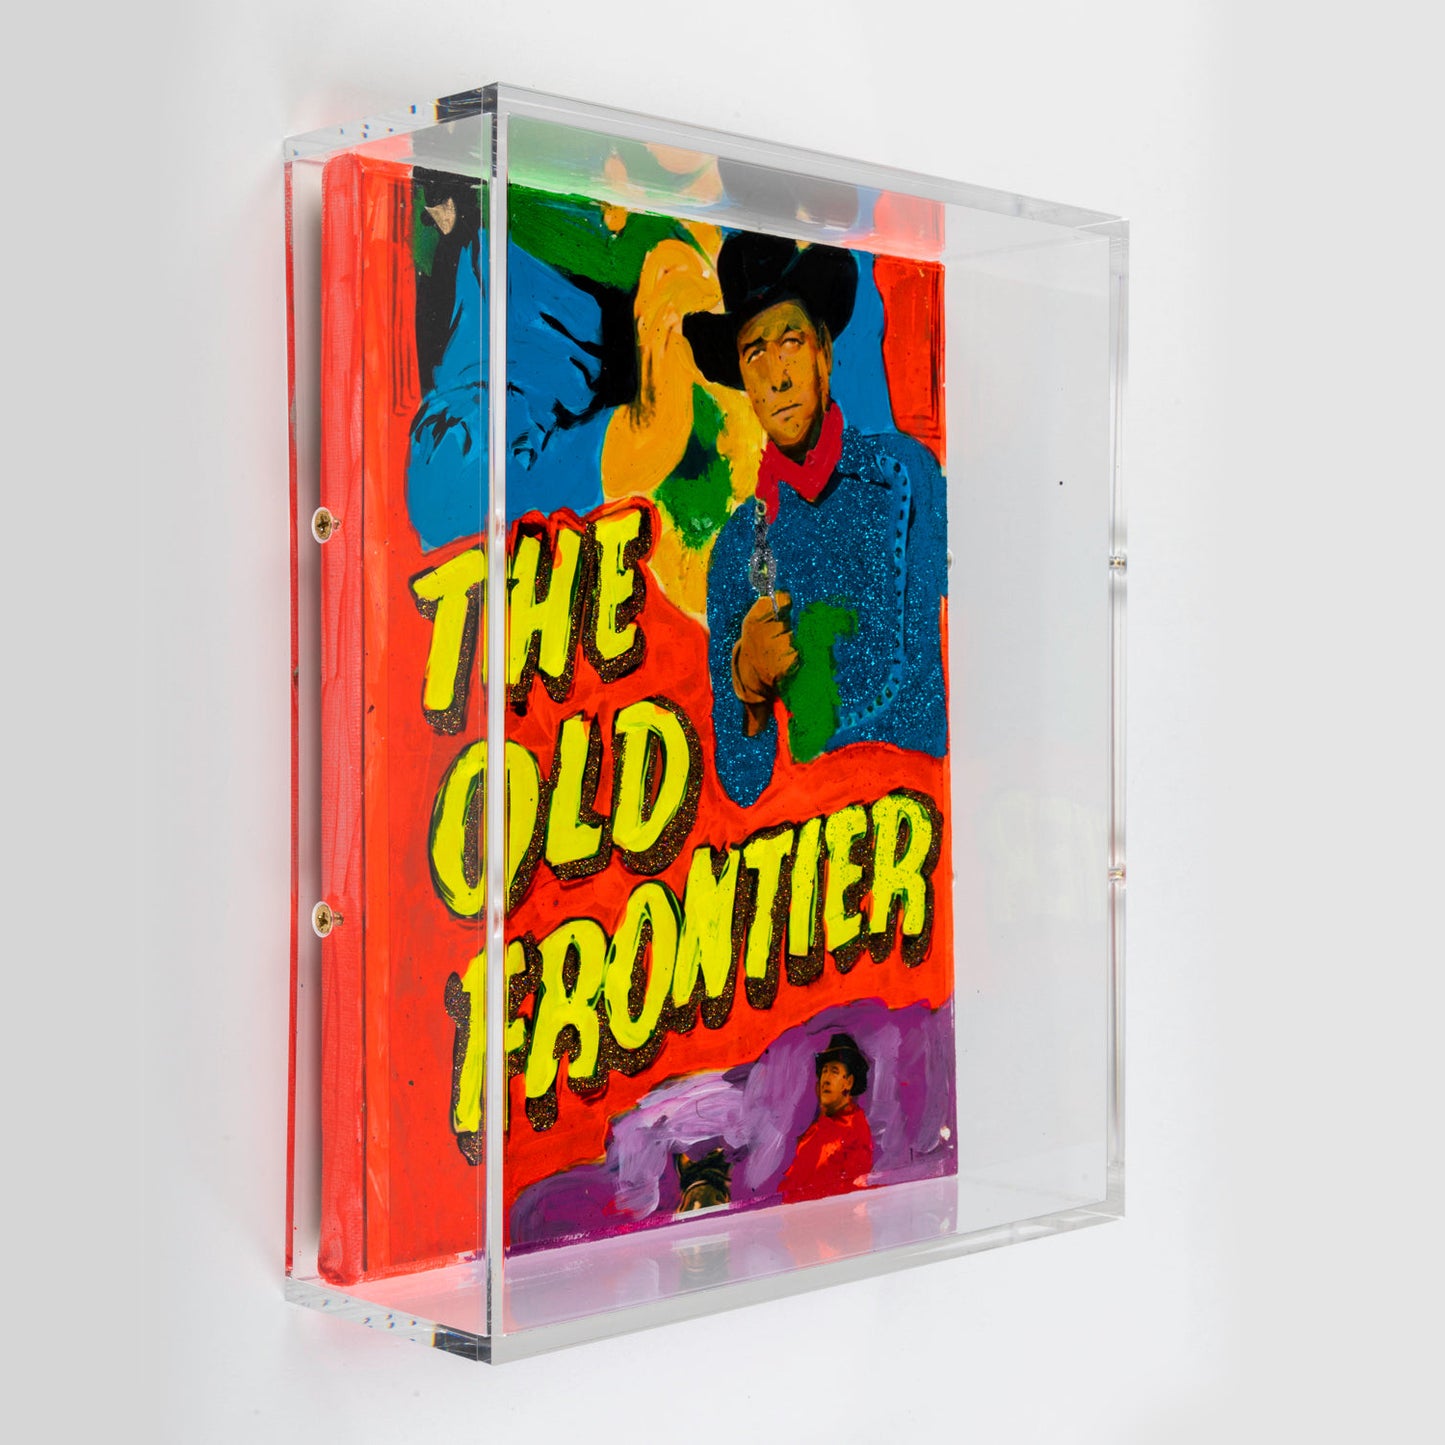 Old Frontier by Bachman + Petrie